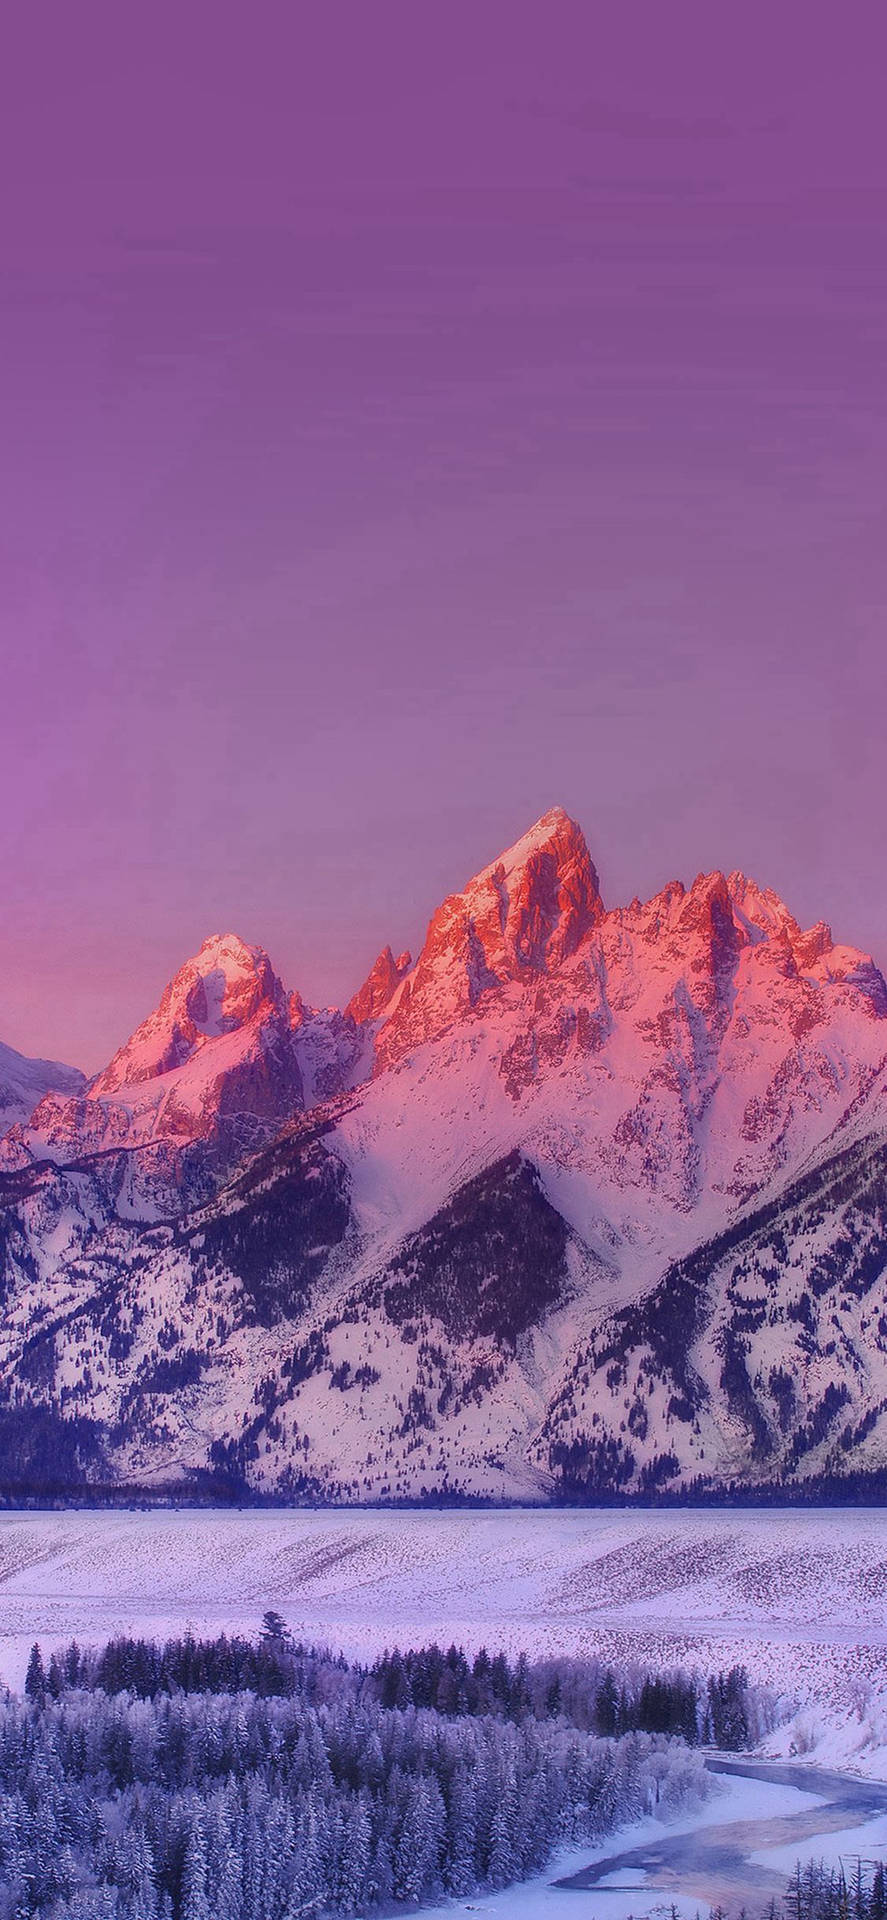 Aesthetic Snowy Mountain For IPhone Wallpaper